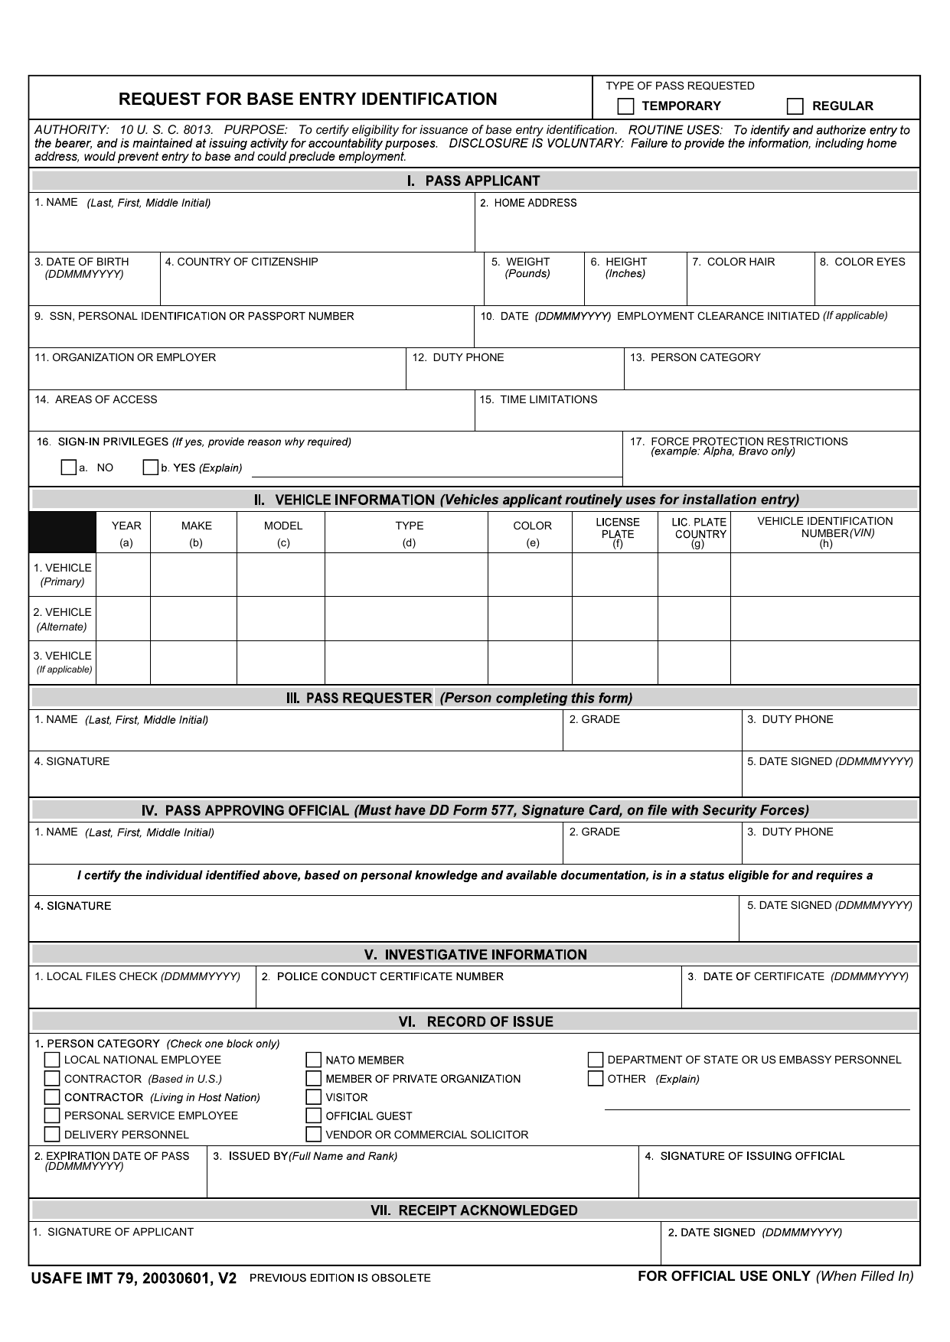 USAFE IMT Form 79 Request for Base Entry Identification, Page 1